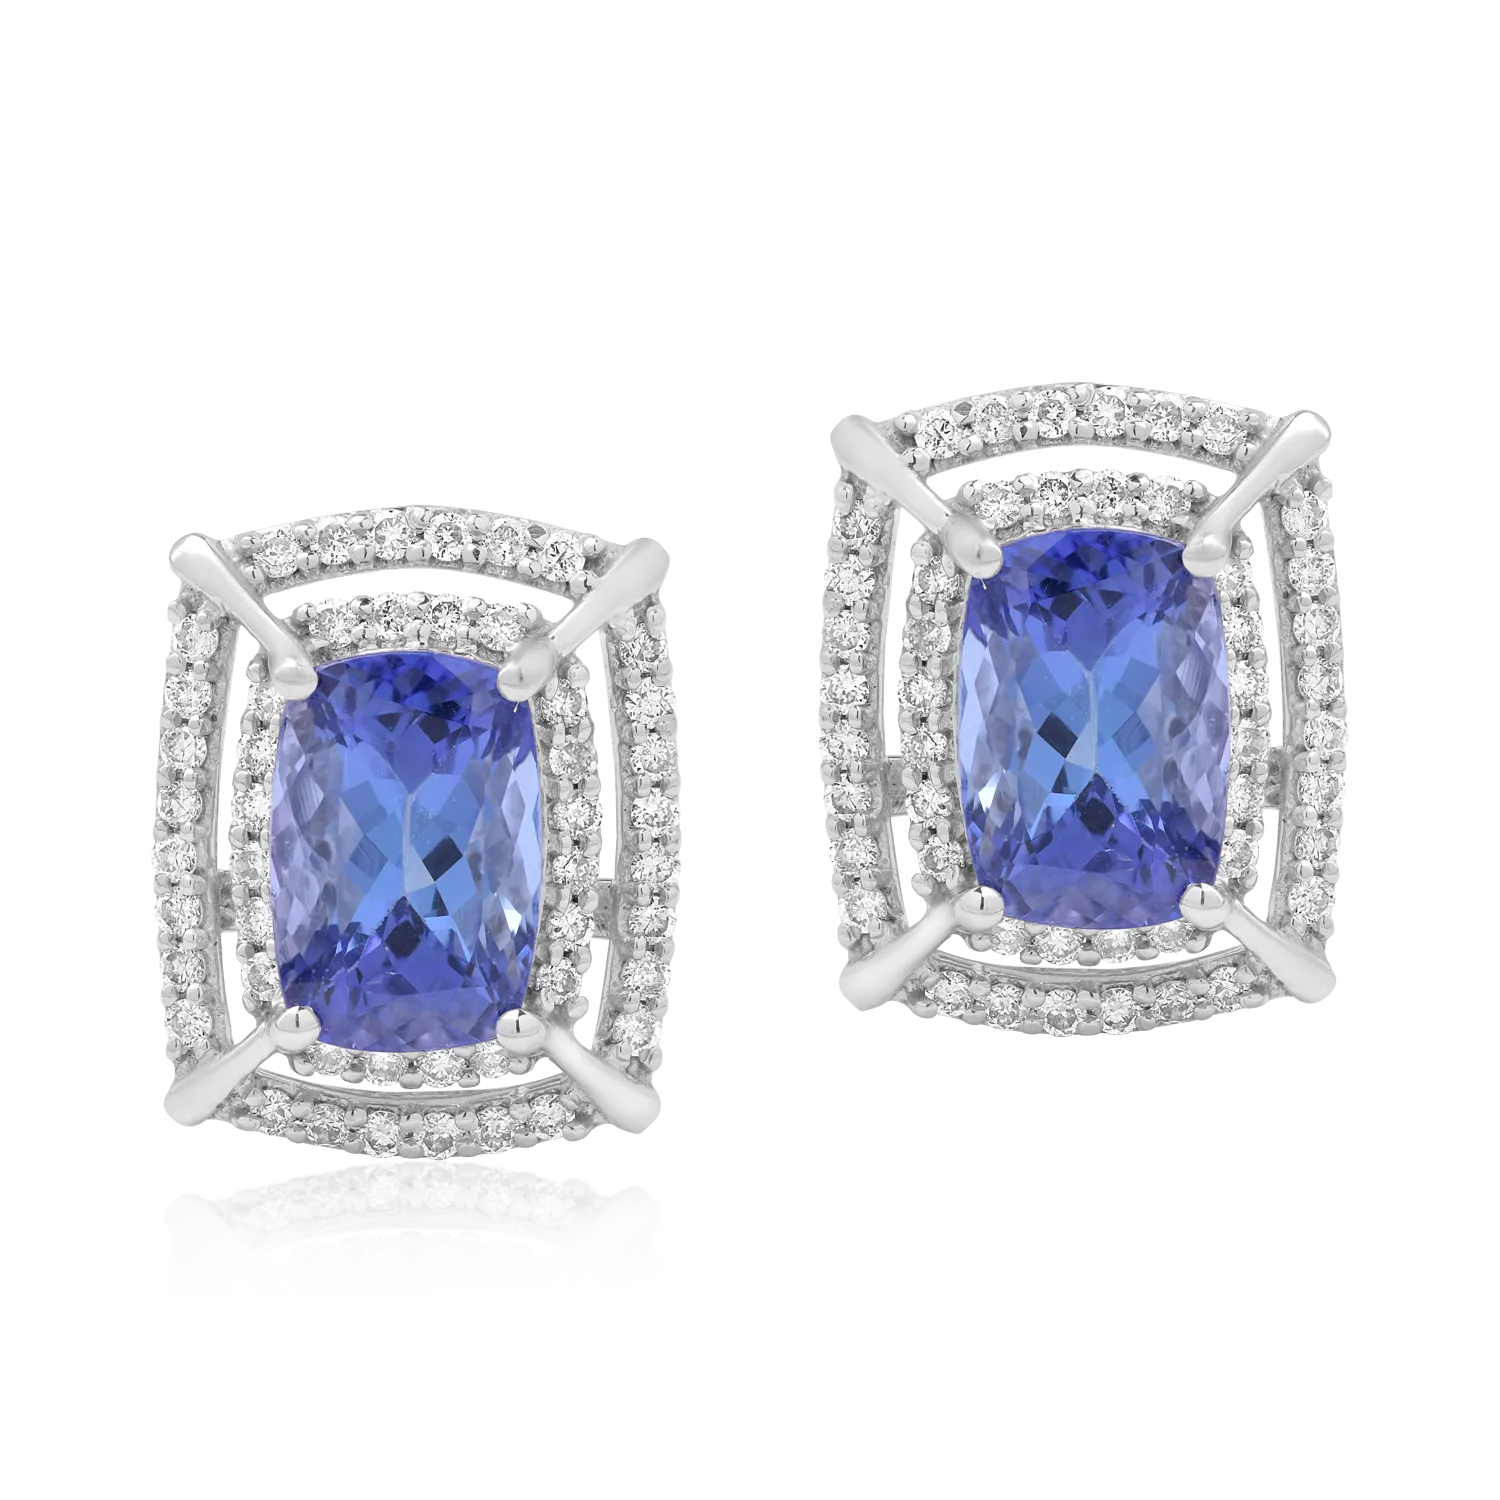 14K white gold earrings with 4.56ct tanzanites and 0.69ct diamonds